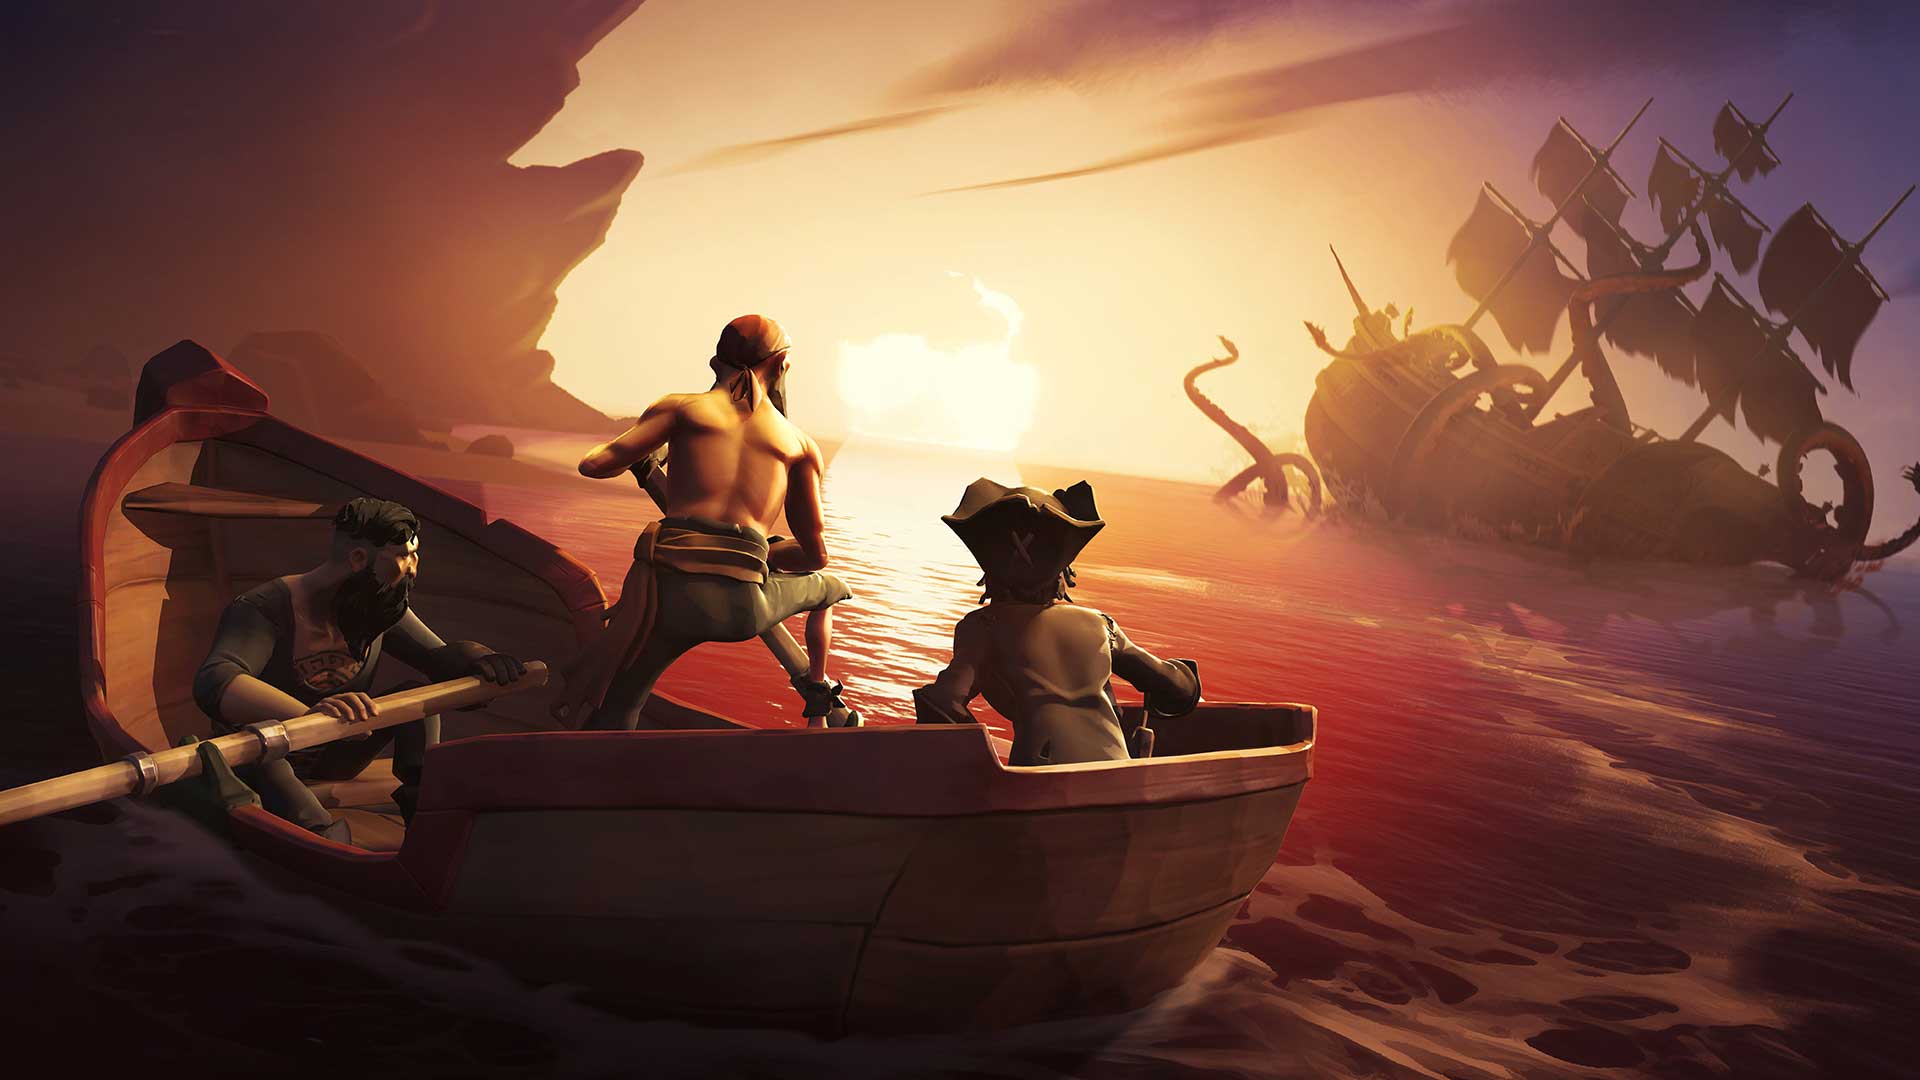 The Art of Sea of Thieves